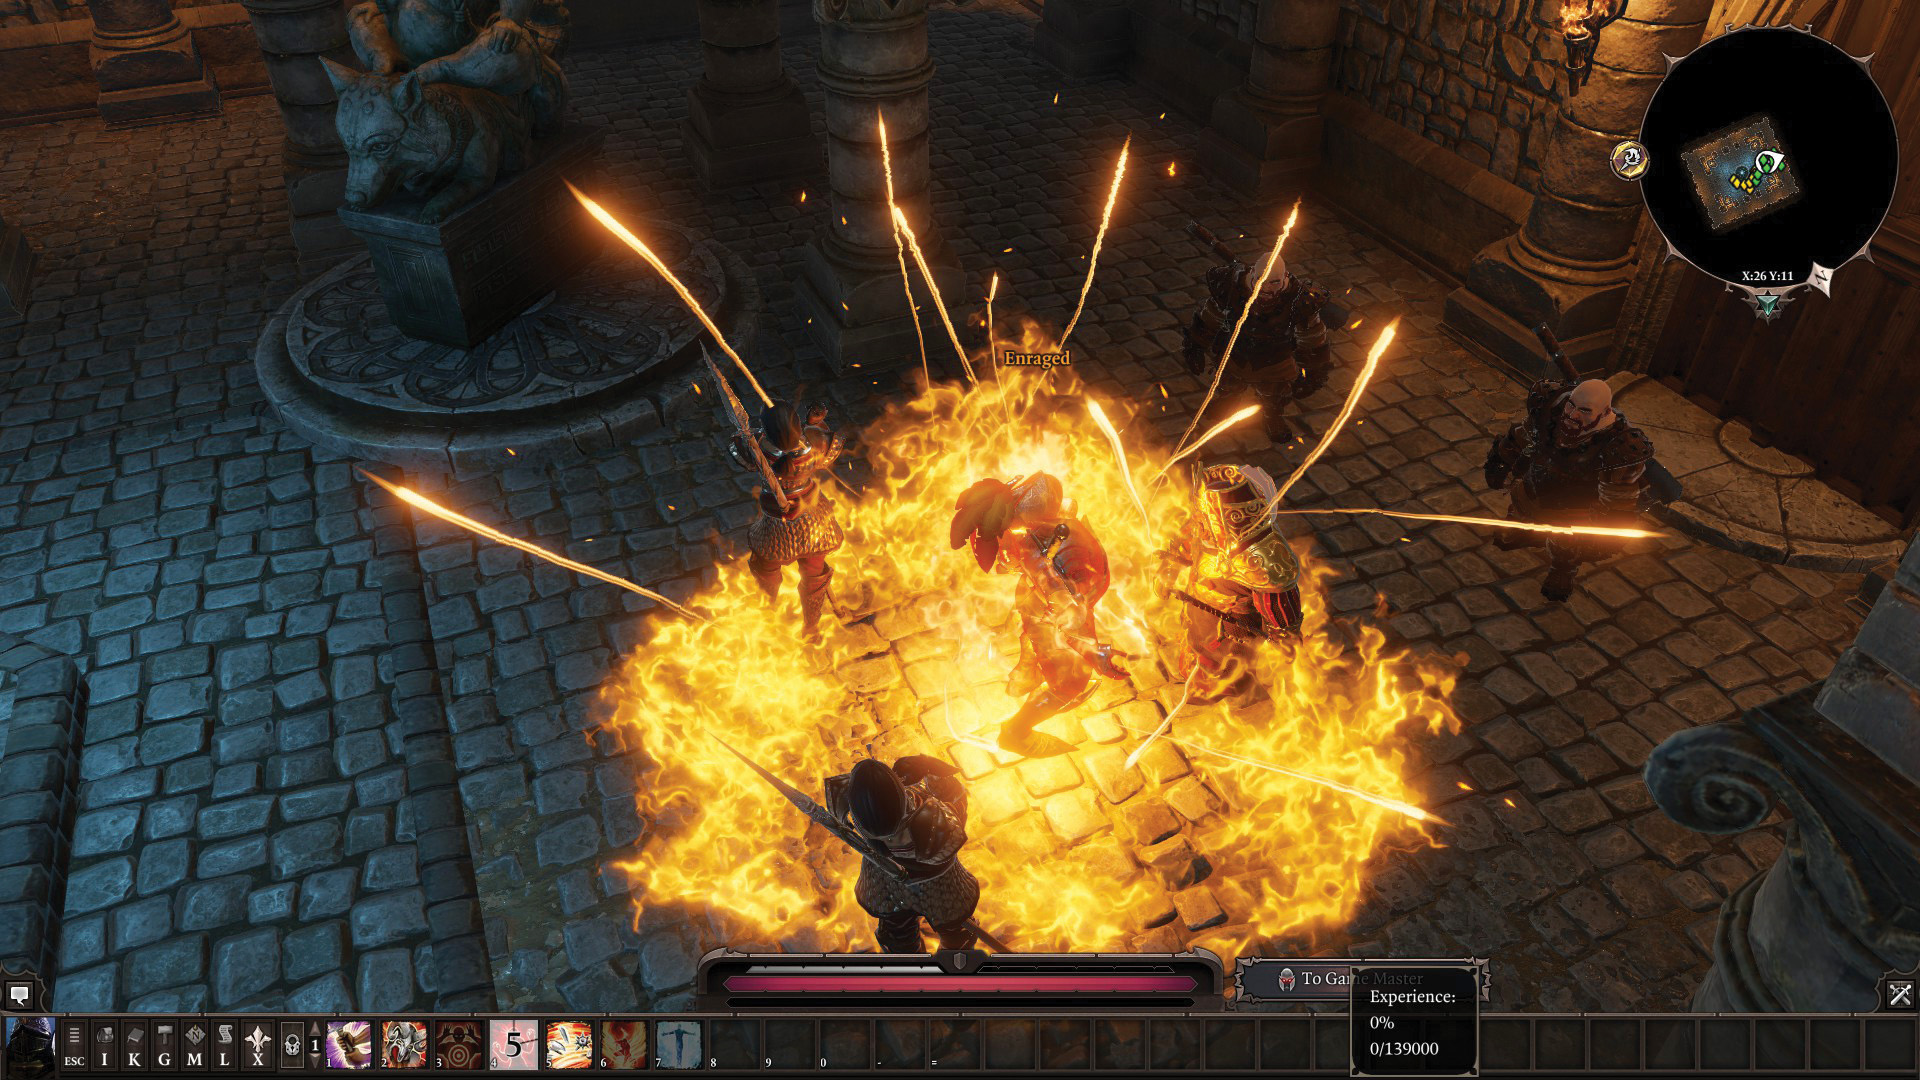  Great moments in PC gaming: Playing with fire in Divinity: Original Sin 2 